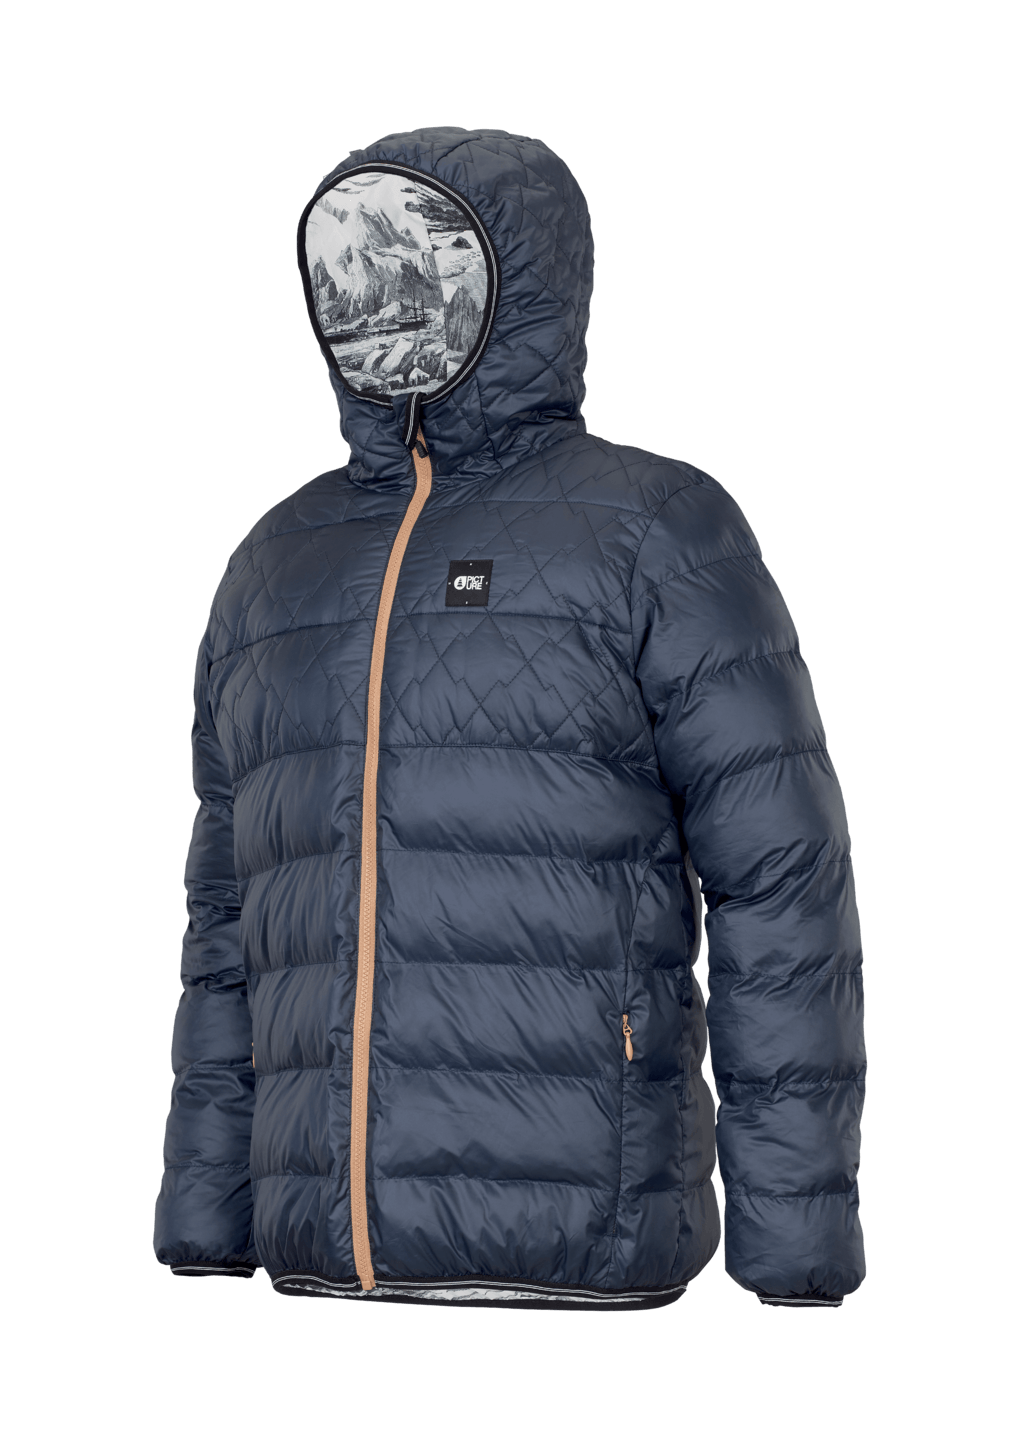 Picture Mens Insulated Jacket - Scape (Reversible) Dark Blue 2XL